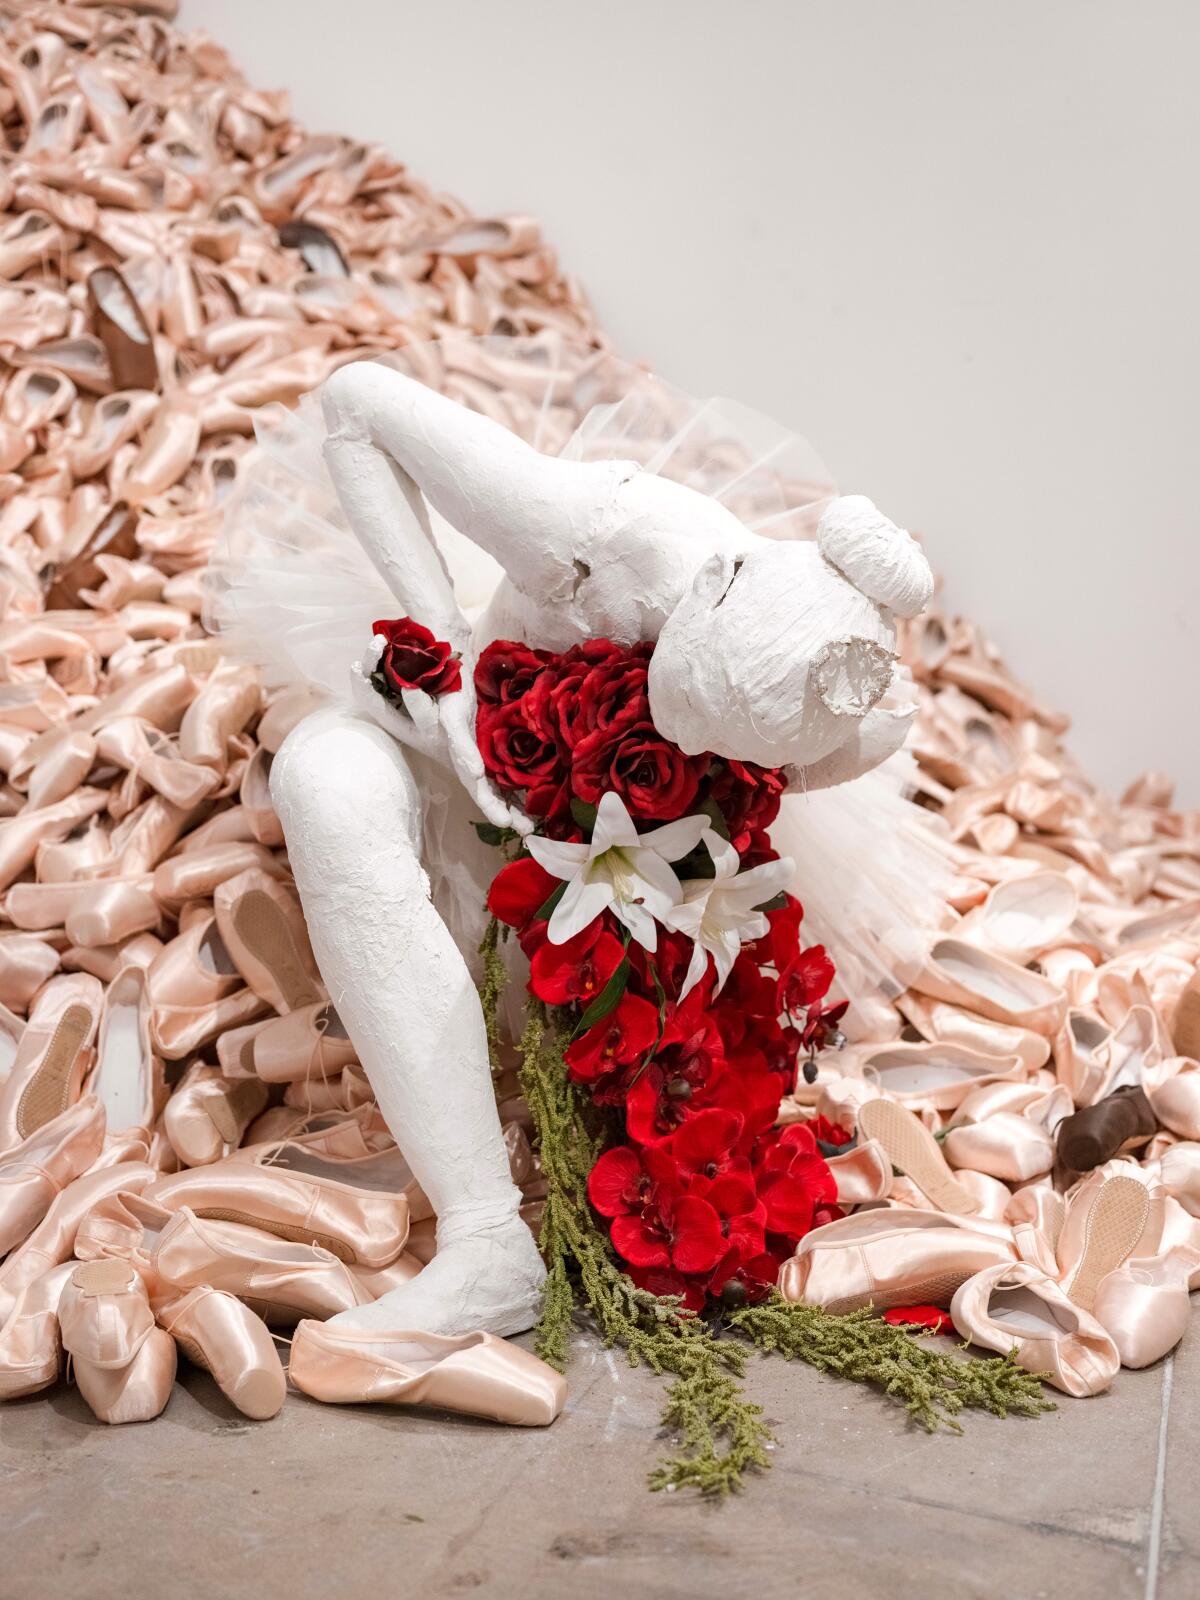 A sculpture of a ballerina sitting on a pile of pink pointe shoes.